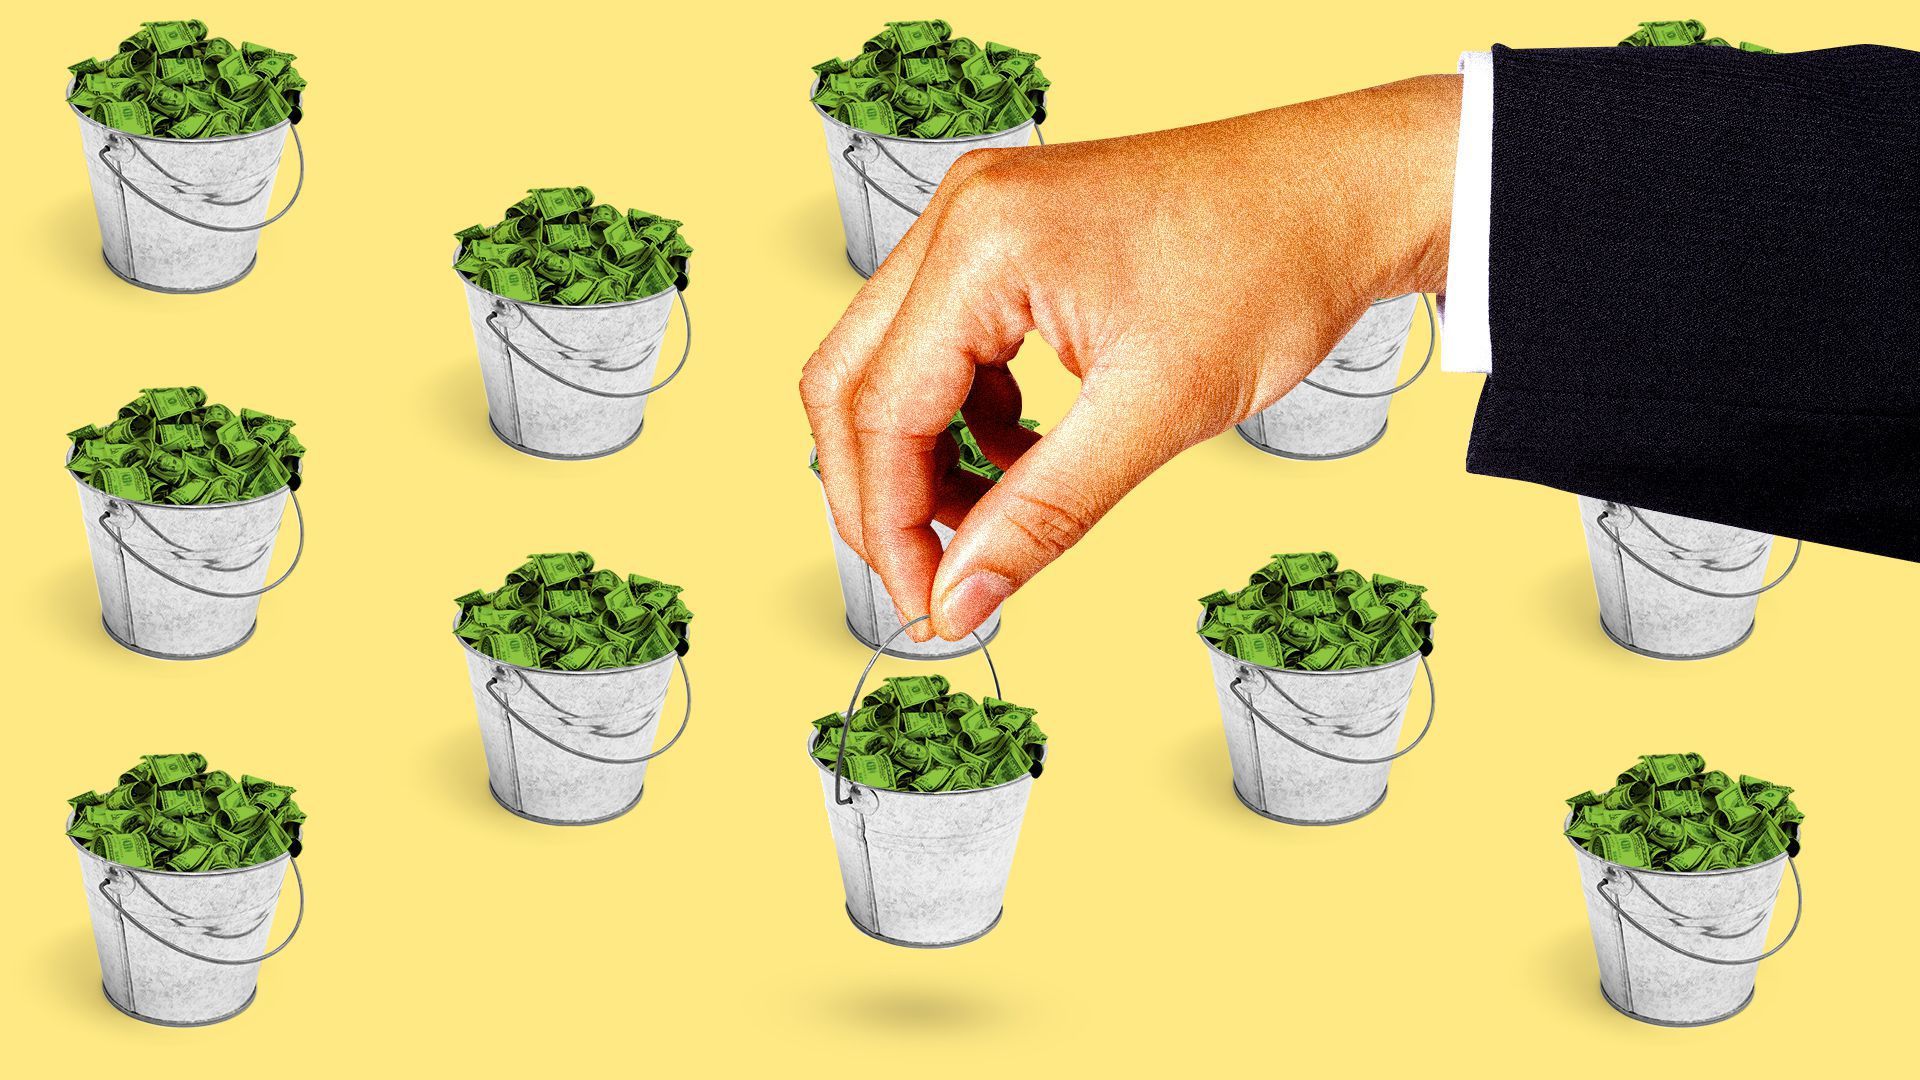 Illustration of a hand holding buckets of cash.